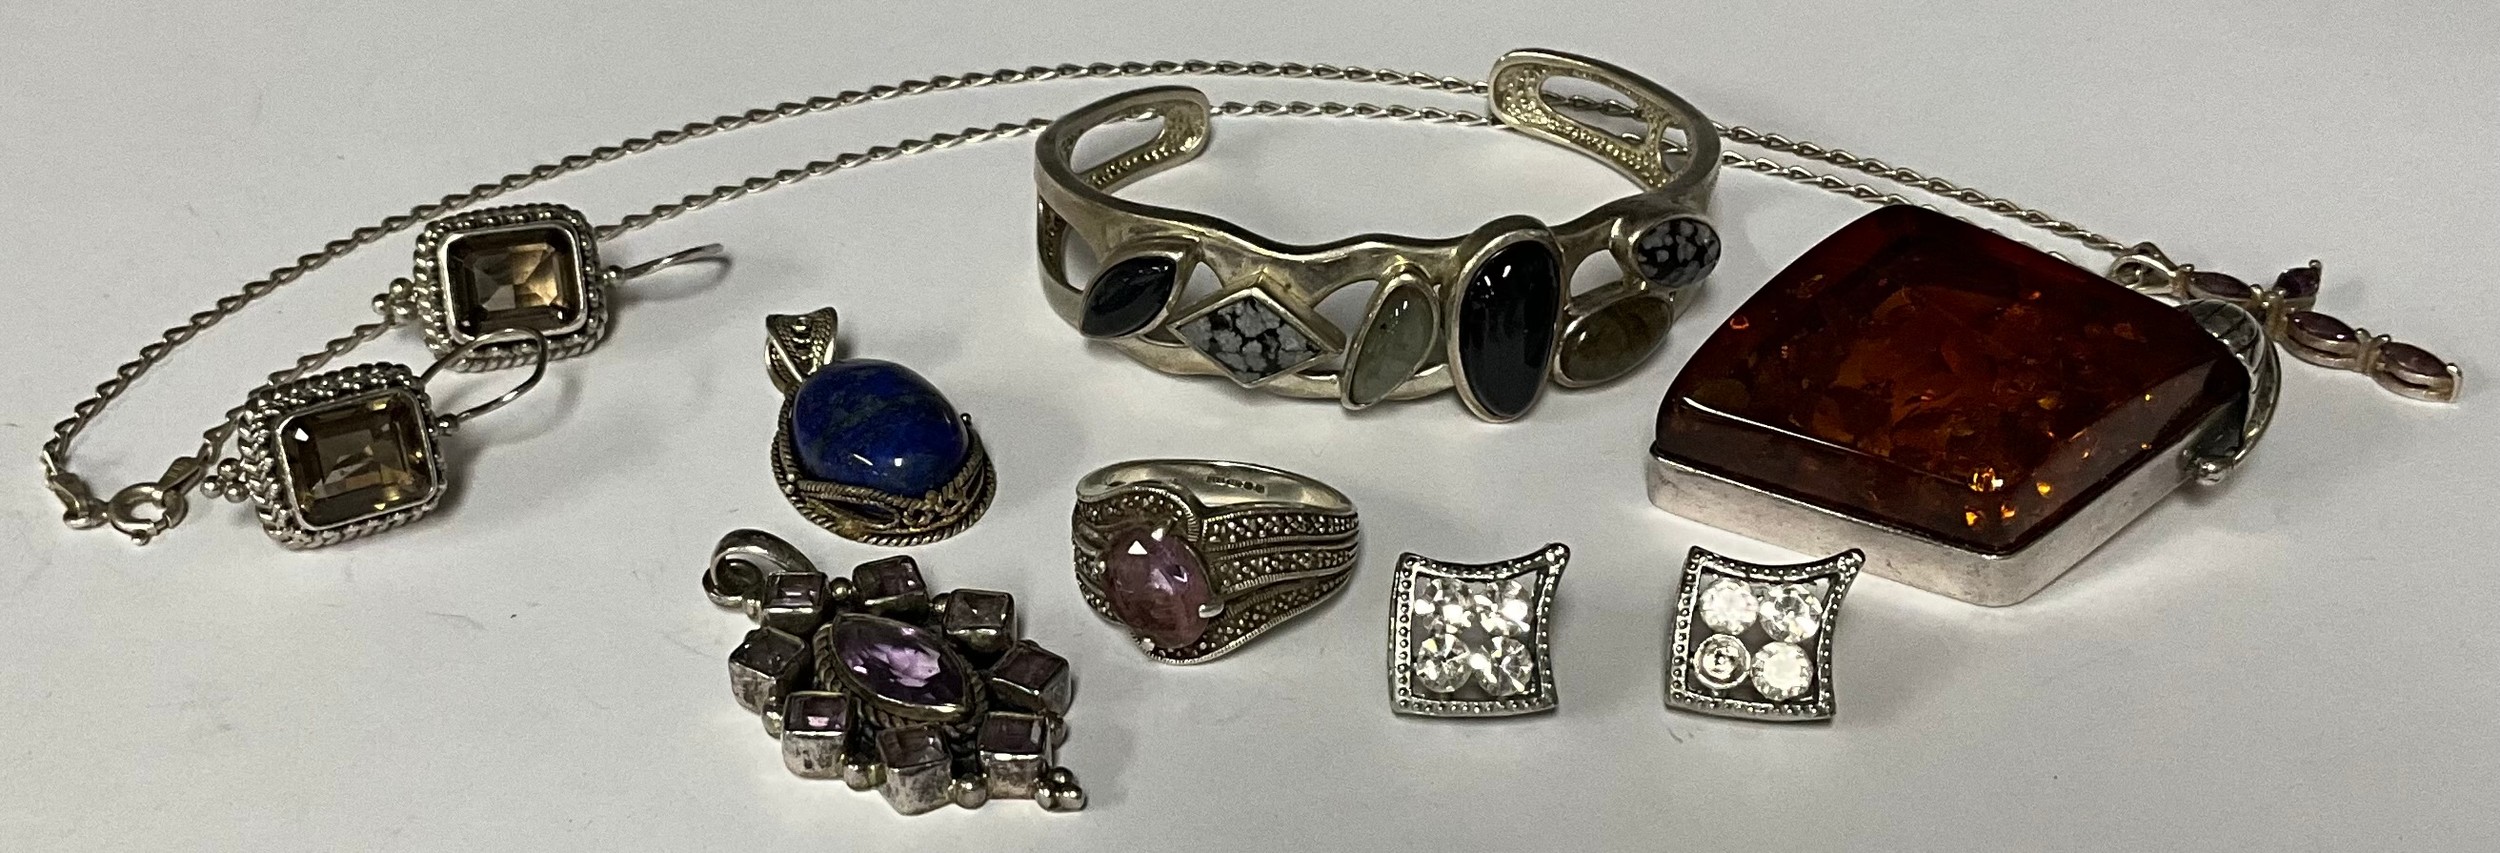 A sterling silver cuff bracelet, set with polished semi-precious stones, marked 925; other similar